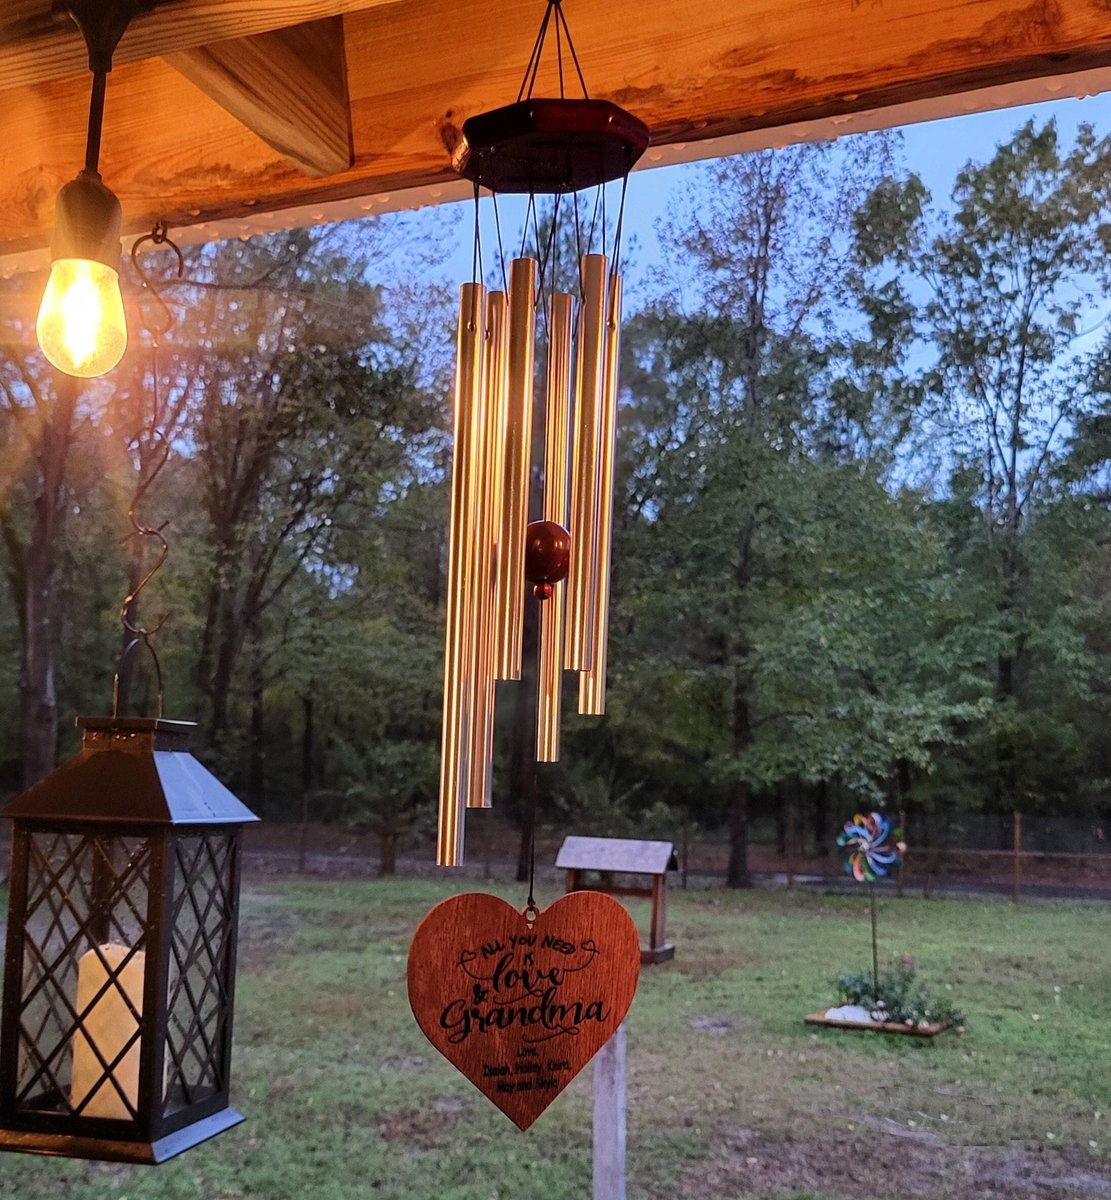 #etsy shop: Personalized Wind Chime Mother's Day gift, Wedding gift for her, Gift for Grandma, Gift for Mom, Outdoor gift, Wind chimes etsy.me/3XUyN4u #weddinggiftforher #giftforgrandma #personalizedgift #christmasgifts #motherofbride #weddingkeepsake #parents